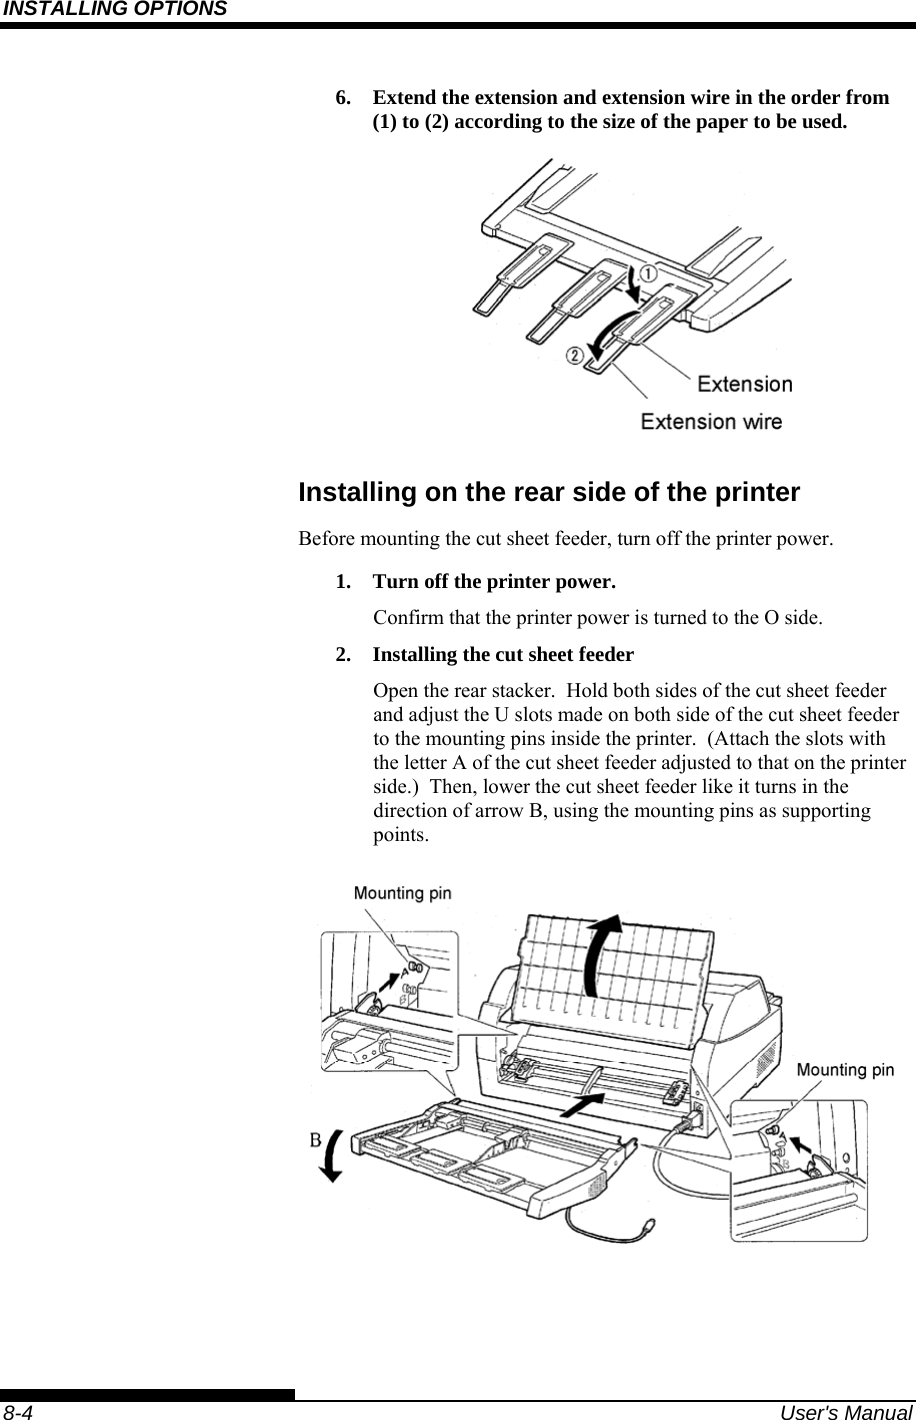 INSTALLING OPTIONS    8-4  User&apos;s Manual 6.  Extend the extension and extension wire in the order from (1) to (2) according to the size of the paper to be used.  Installing on the rear side of the printer Before mounting the cut sheet feeder, turn off the printer power. 1.  Turn off the printer power. Confirm that the printer power is turned to the O side. 2.  Installing the cut sheet feeder Open the rear stacker.  Hold both sides of the cut sheet feeder and adjust the U slots made on both side of the cut sheet feeder to the mounting pins inside the printer.  (Attach the slots with the letter A of the cut sheet feeder adjusted to that on the printer side.)  Then, lower the cut sheet feeder like it turns in the direction of arrow B, using the mounting pins as supporting points.  